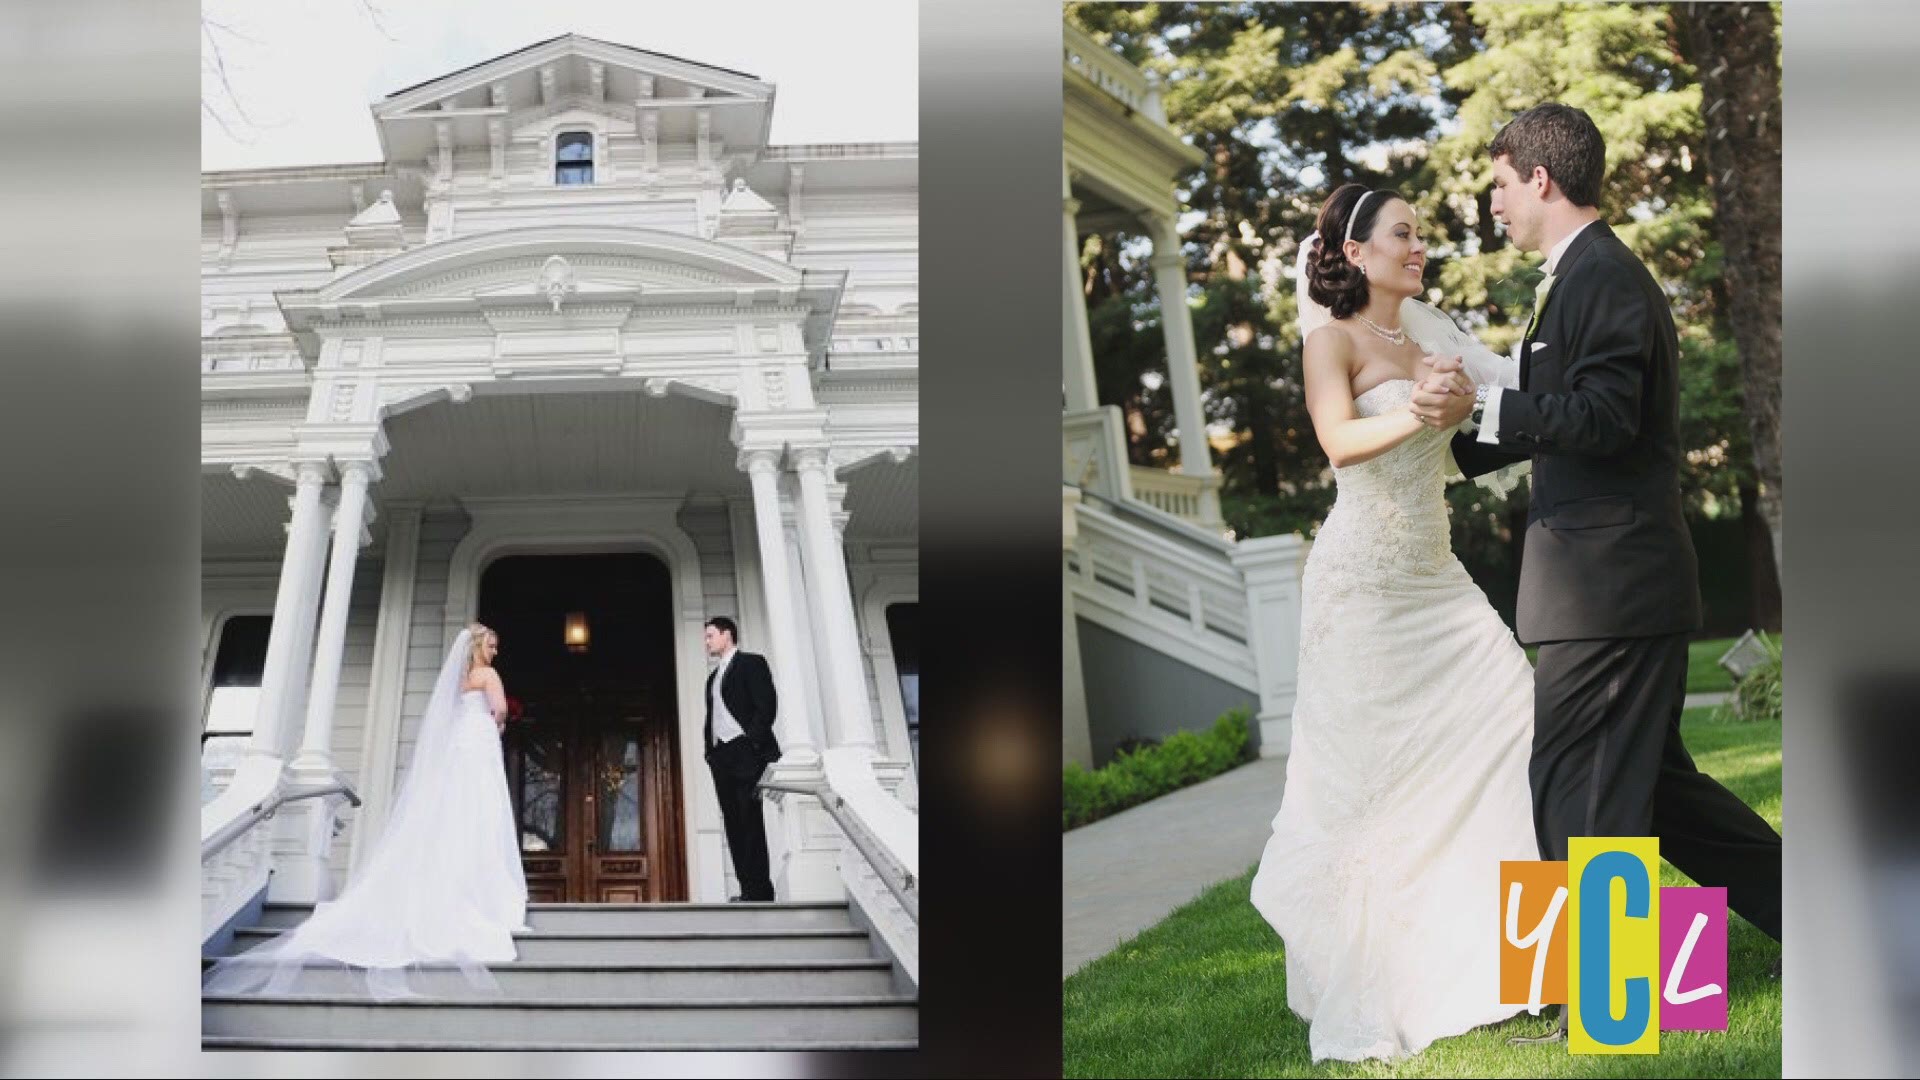 Stanislaus County Clerk - Commissioner of Civil Marriages, Donna Linder invites engaged couples to be married on Valentine's Day at the McHenry Mansion in Modesto.